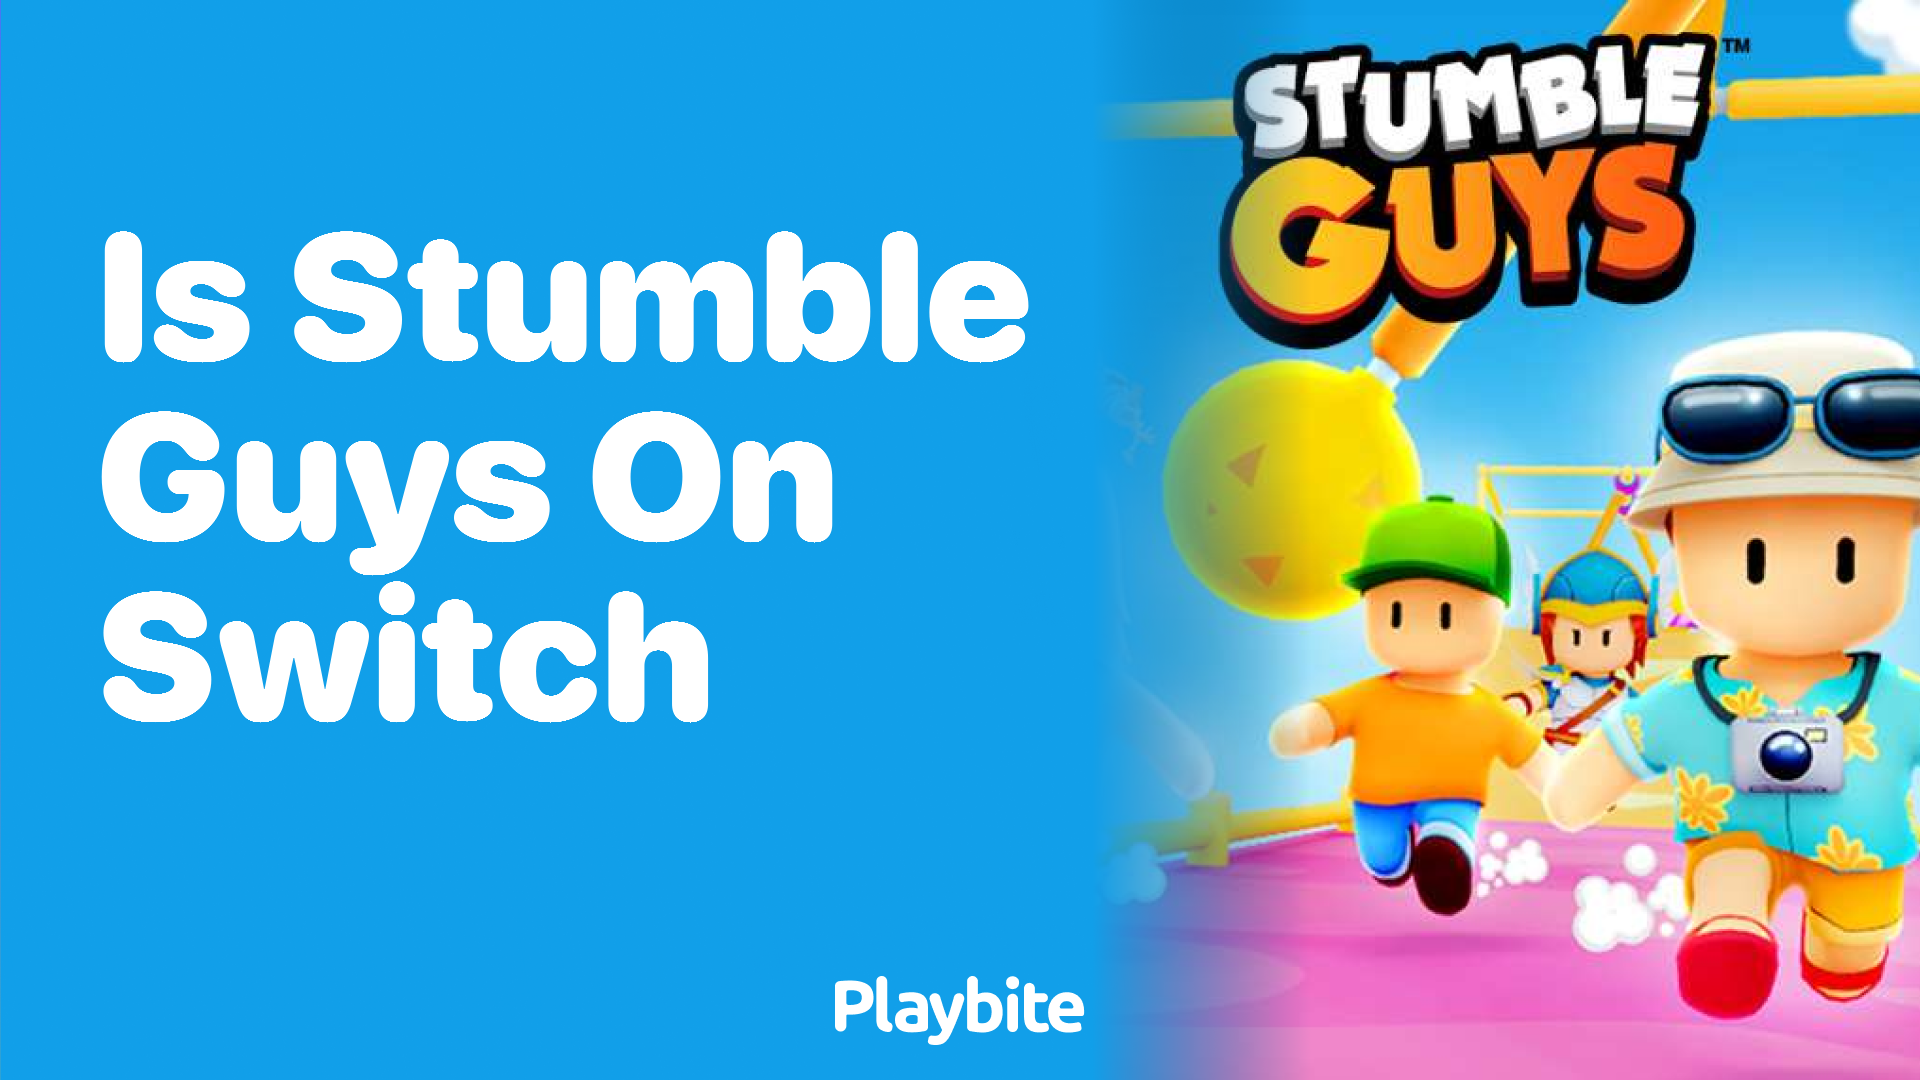 Is Stumble Guys available on Switch?